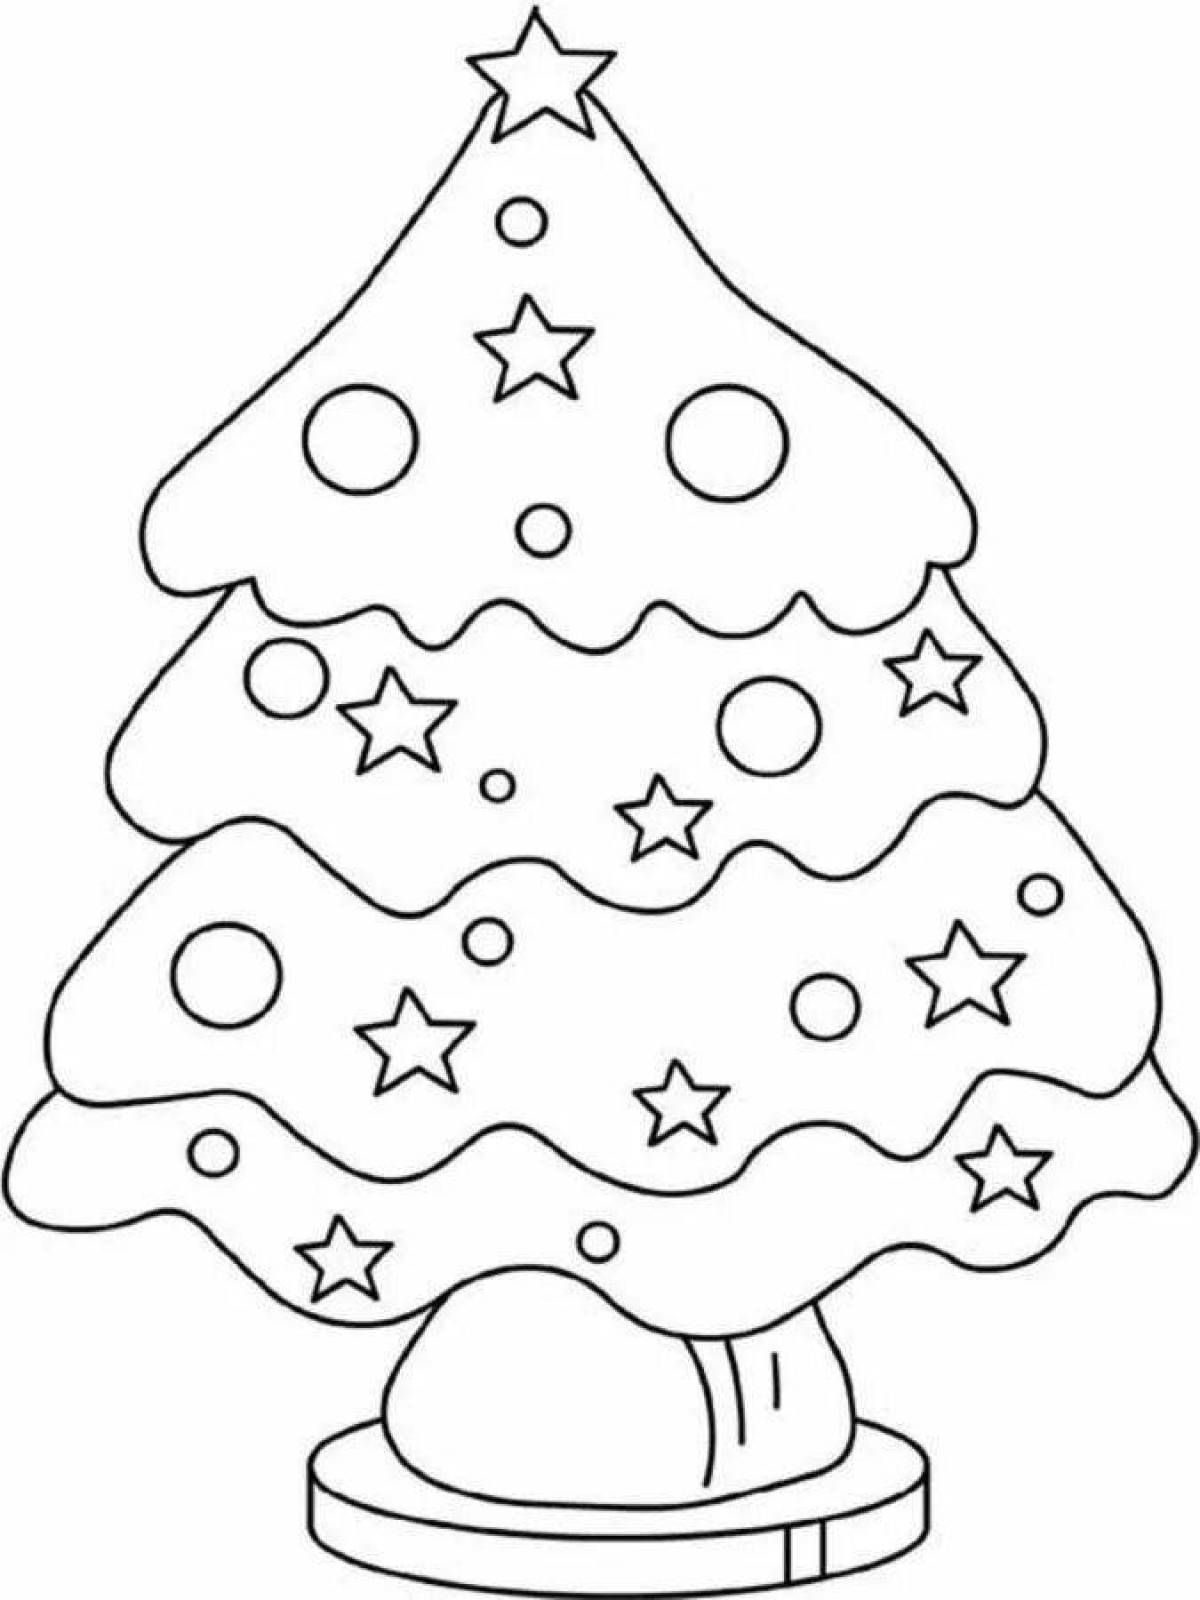 Christmas tree animated coloring book for kids